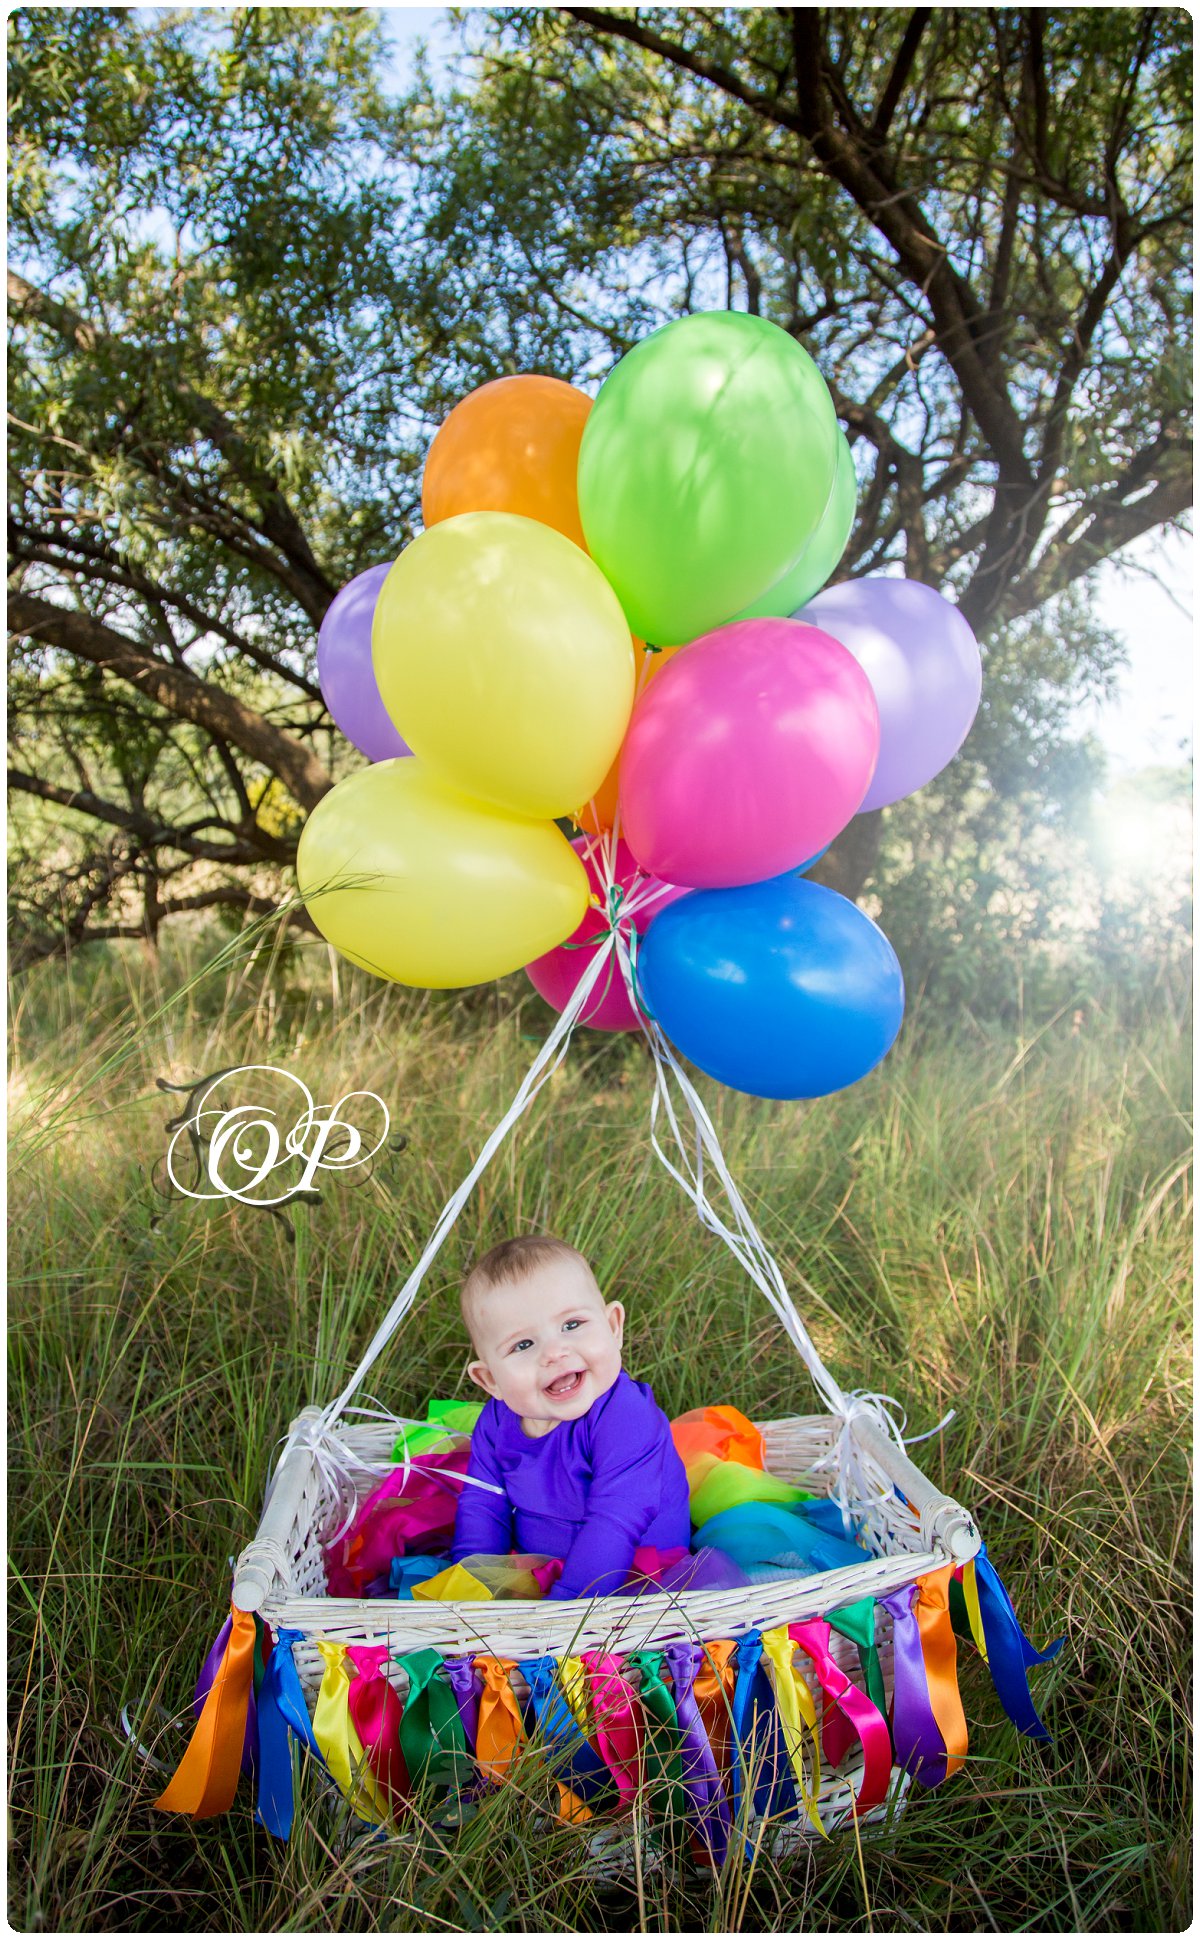 Mikayla’s 6 month shoot…